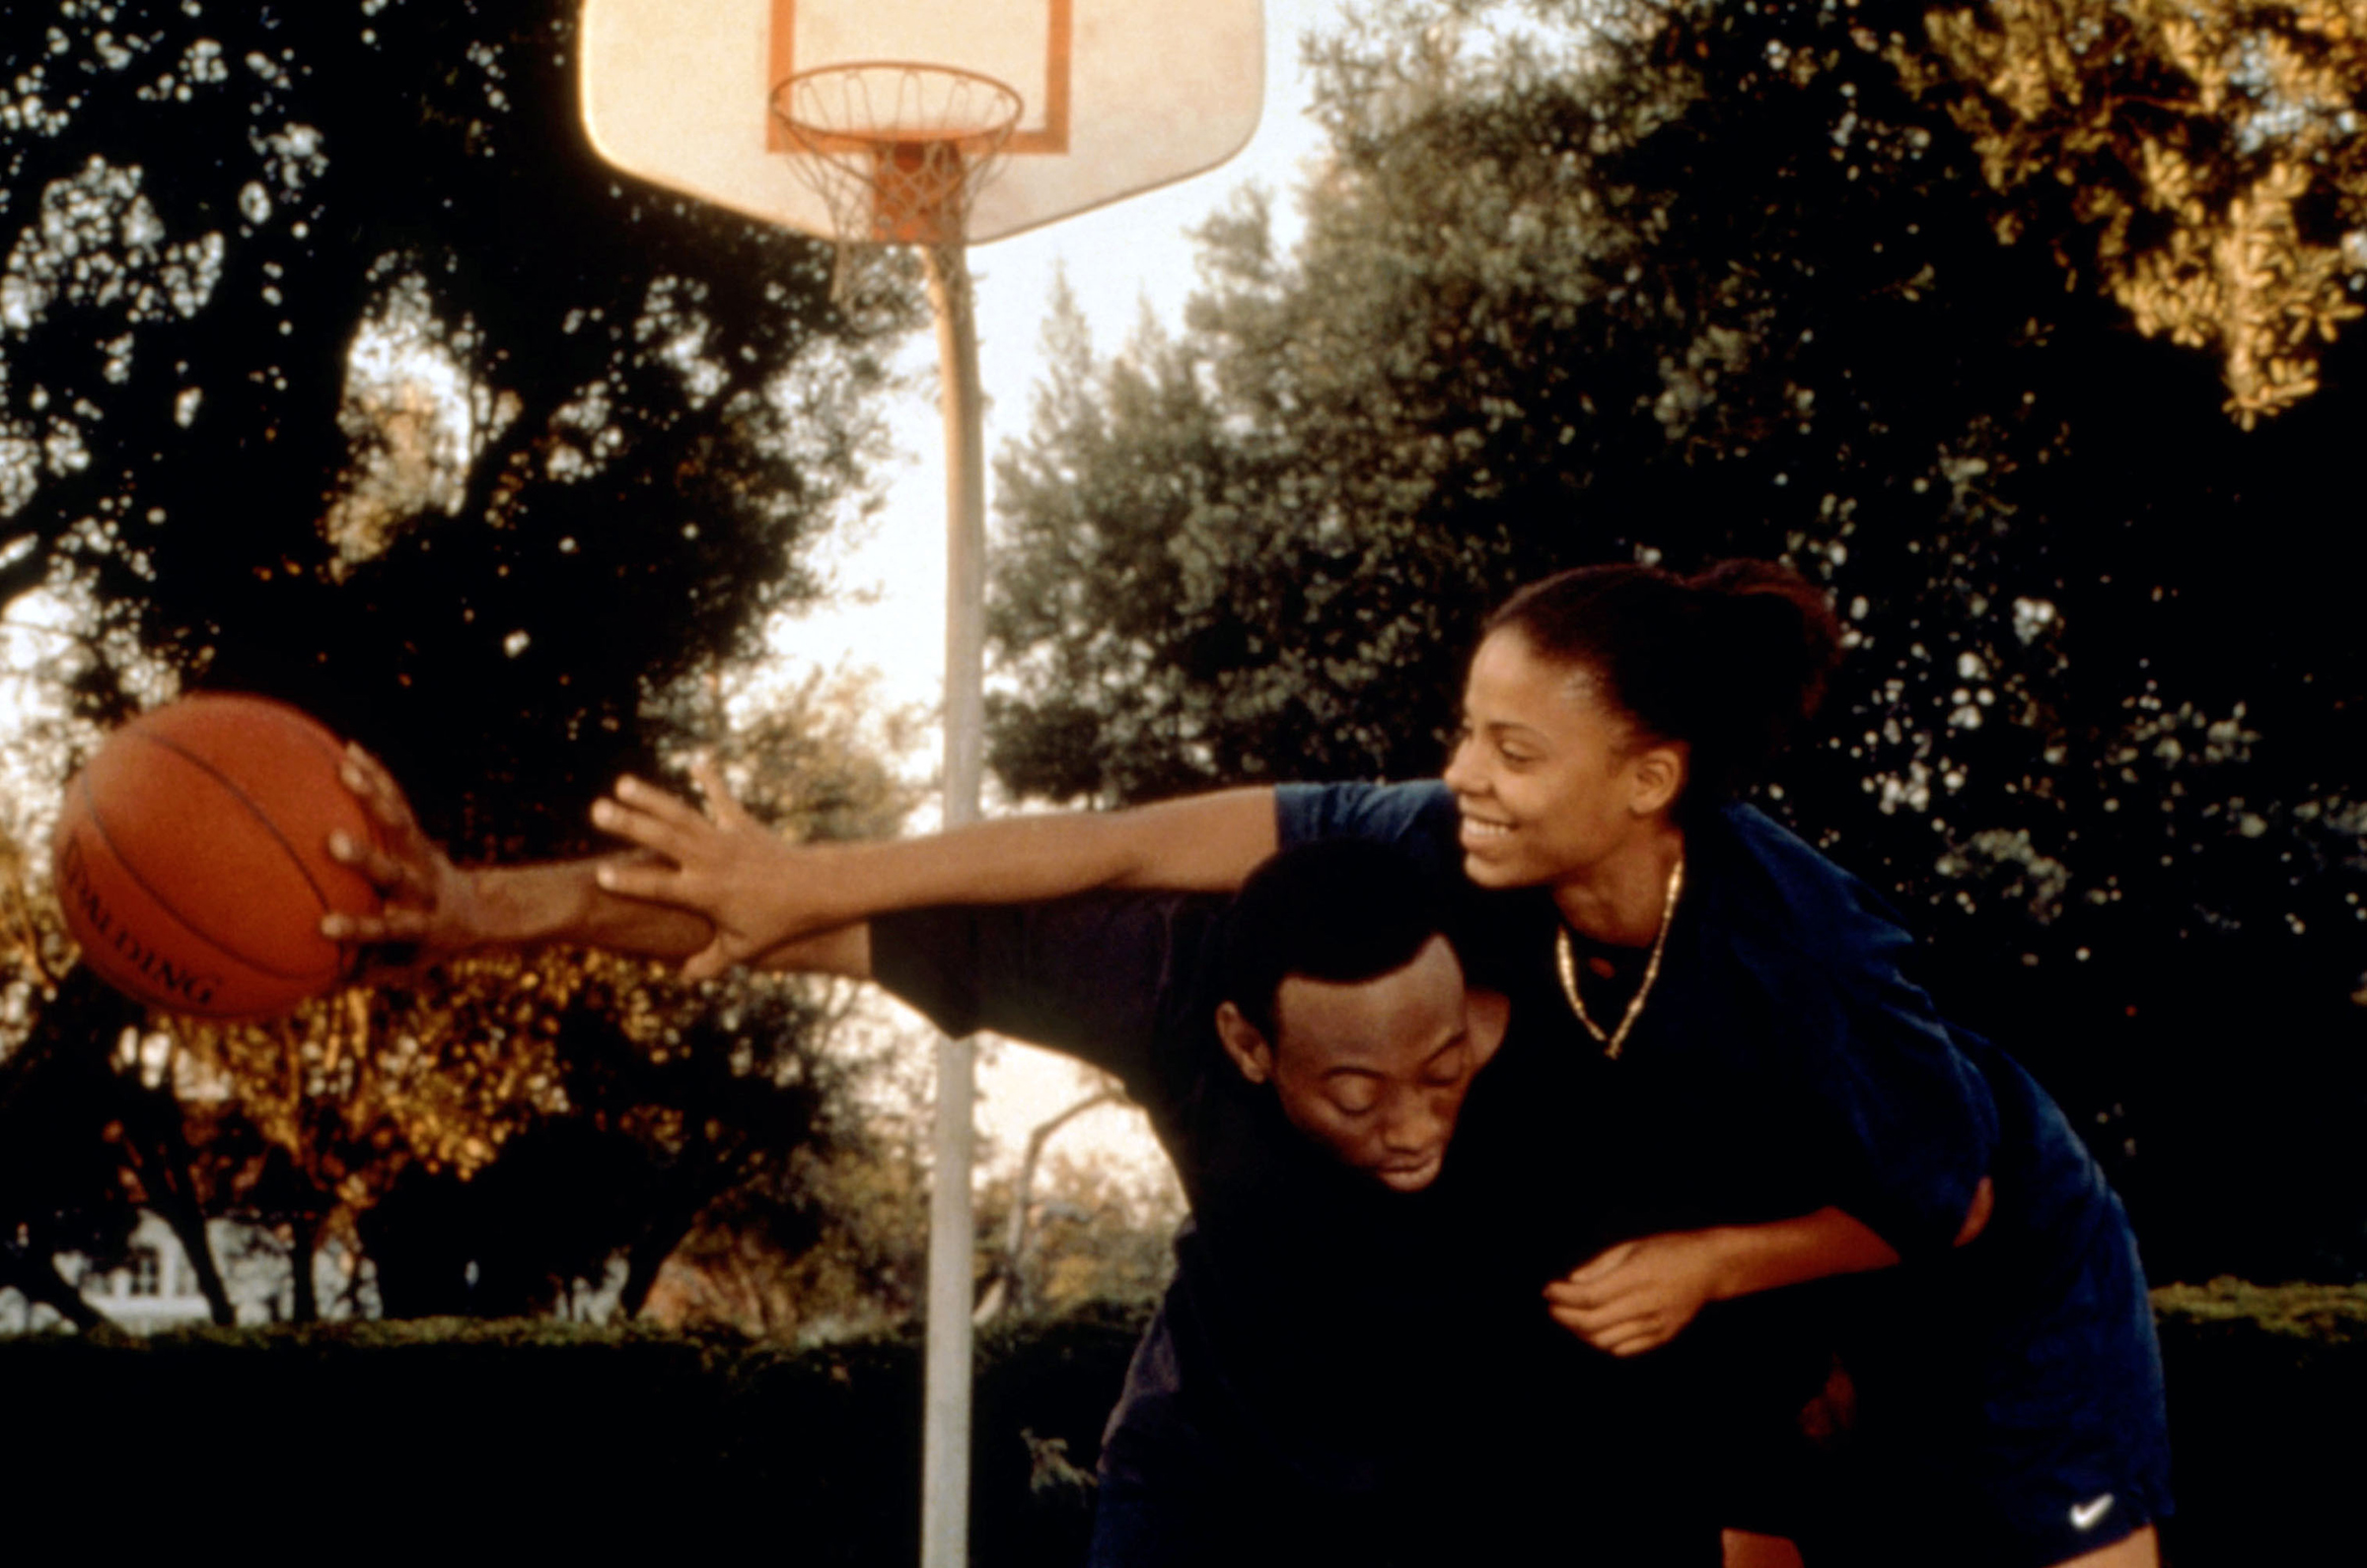 Omar Epps and Sanaa Lathan in 'Love &amp; Basketball'. (New Line Cinema/Everett Collection)